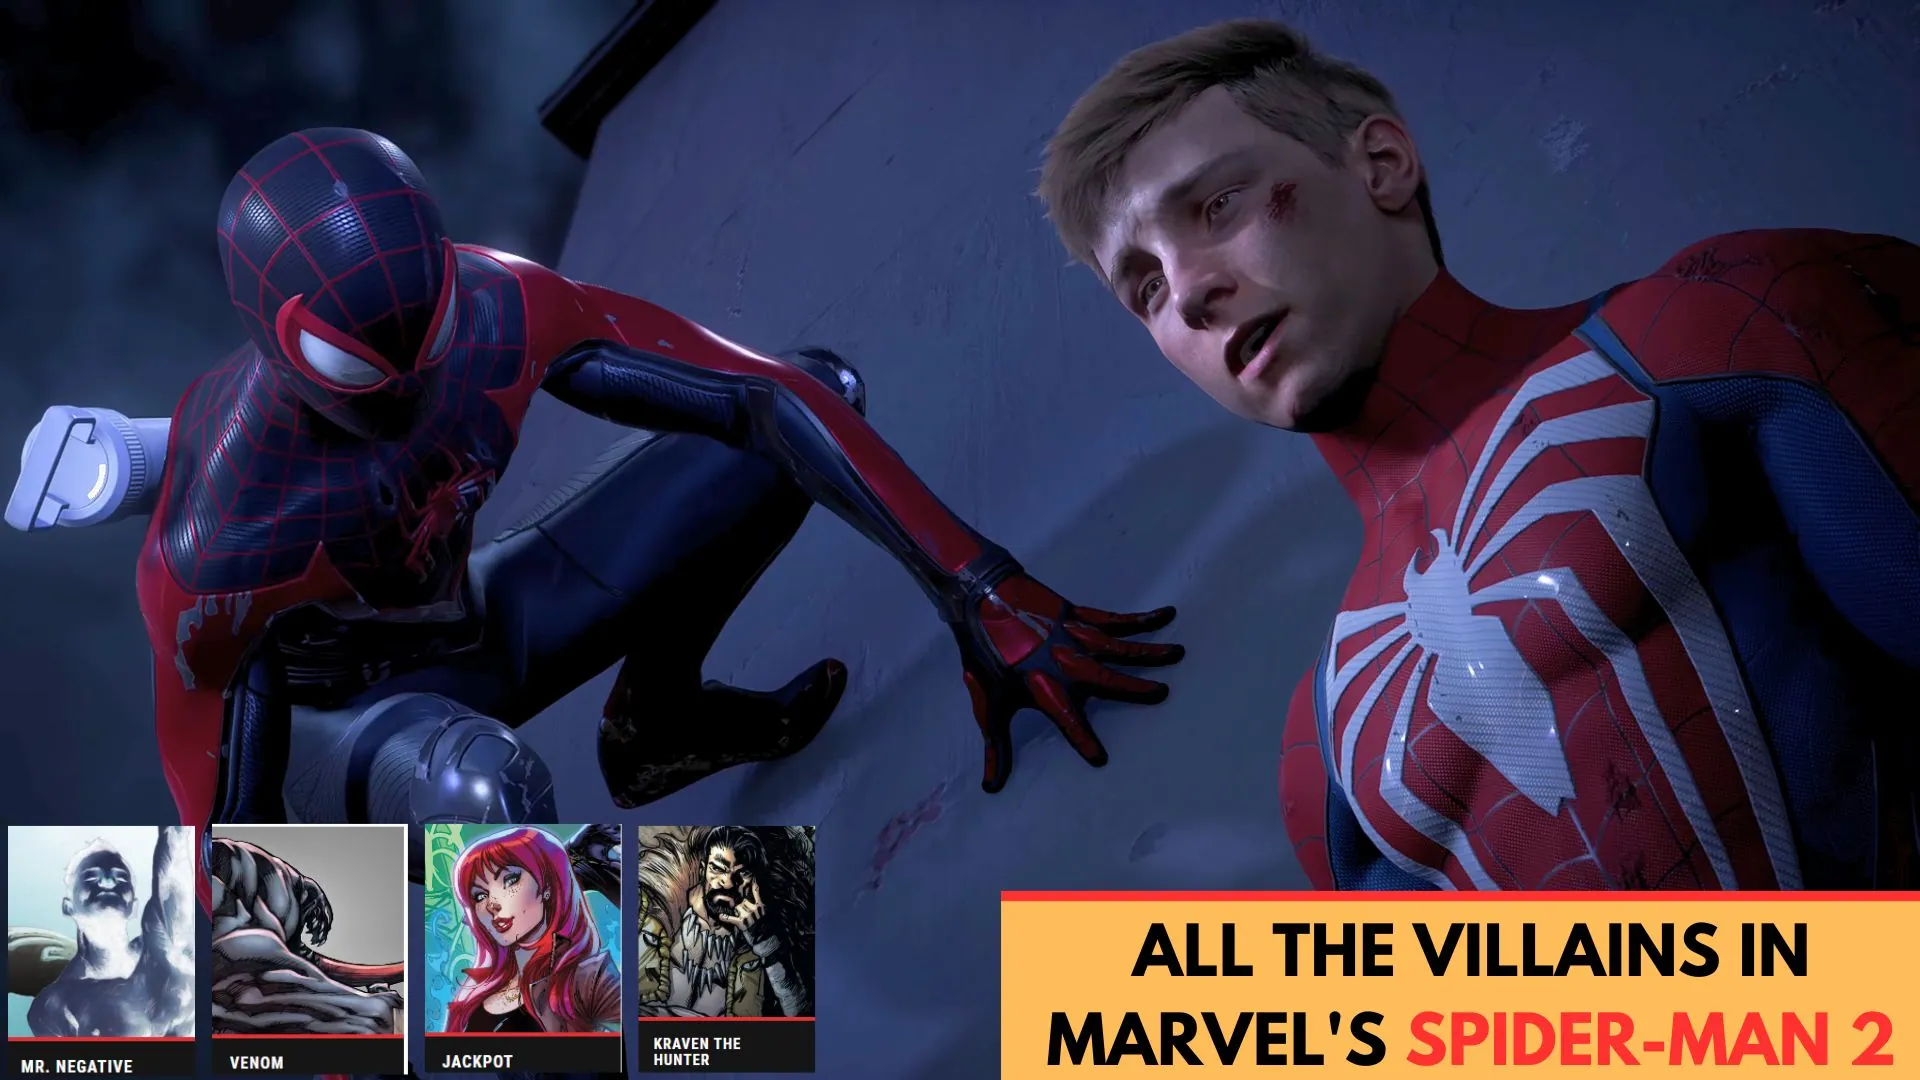 All the Villains in Marvel's Spider-Man 2